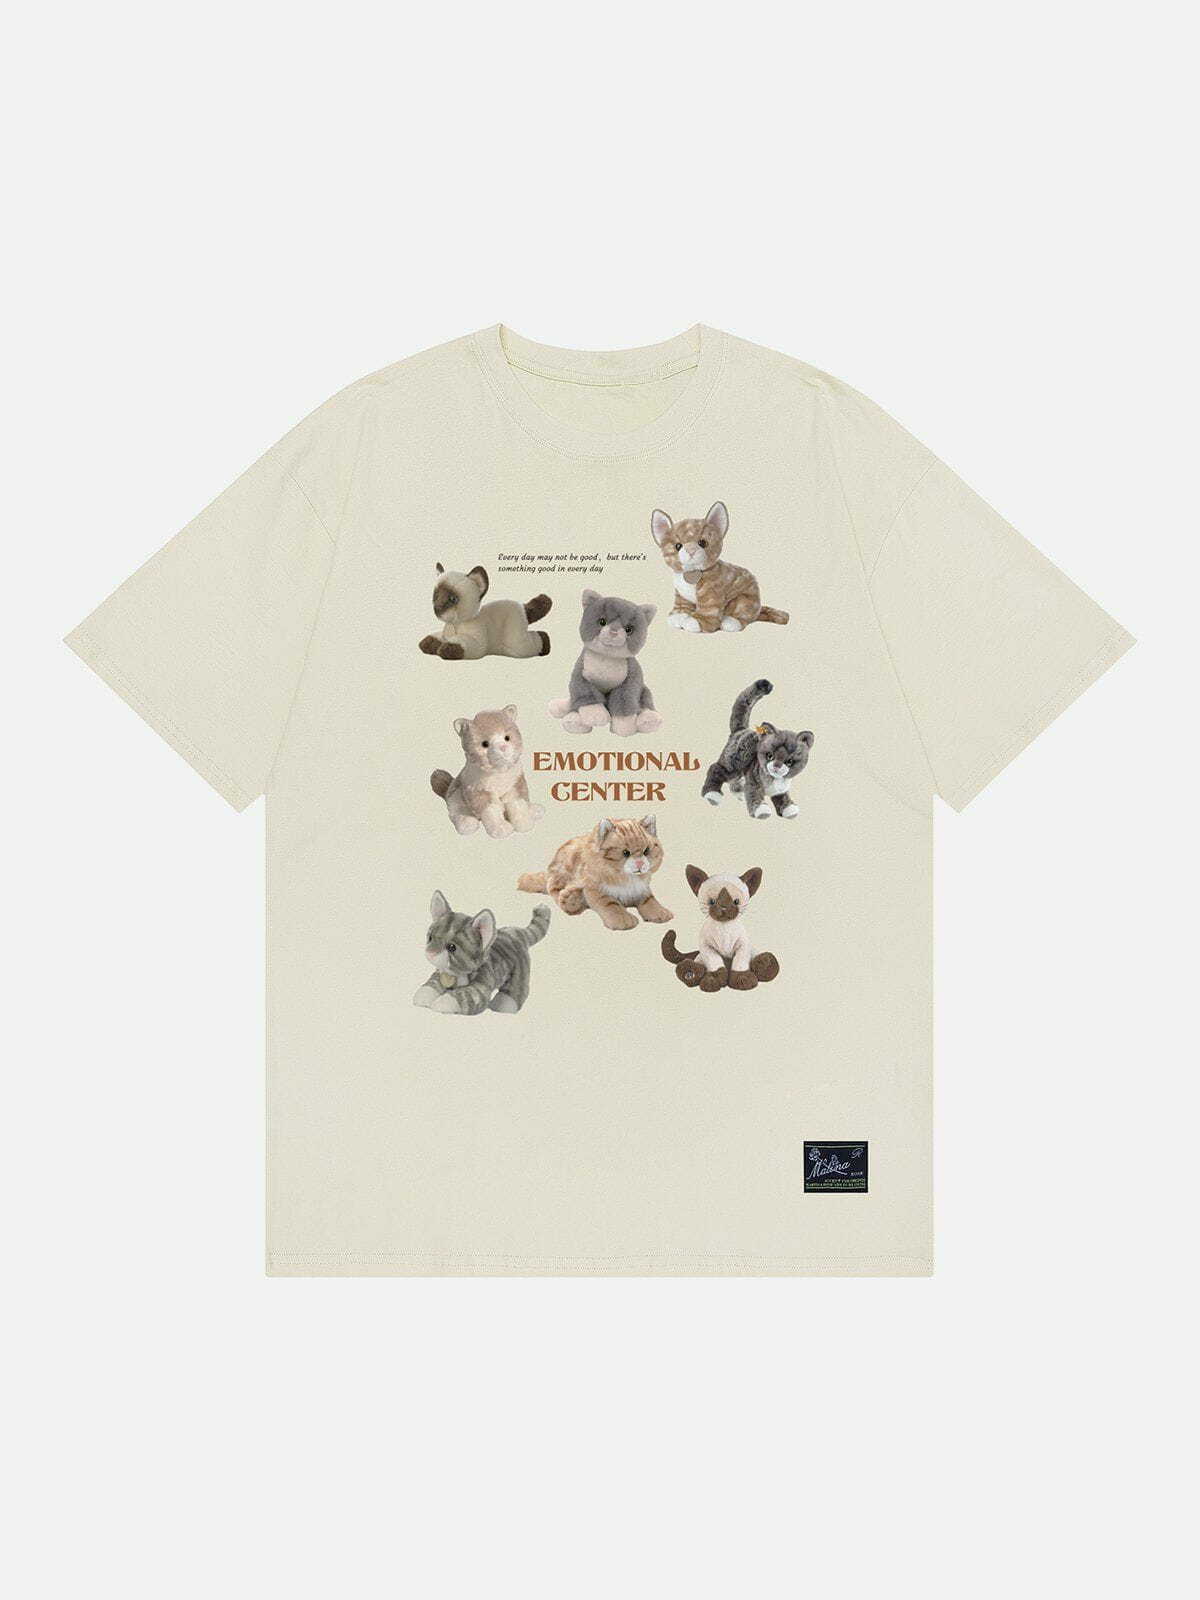 iconic male cats print tee edgy streetwear for trendsetters 2210